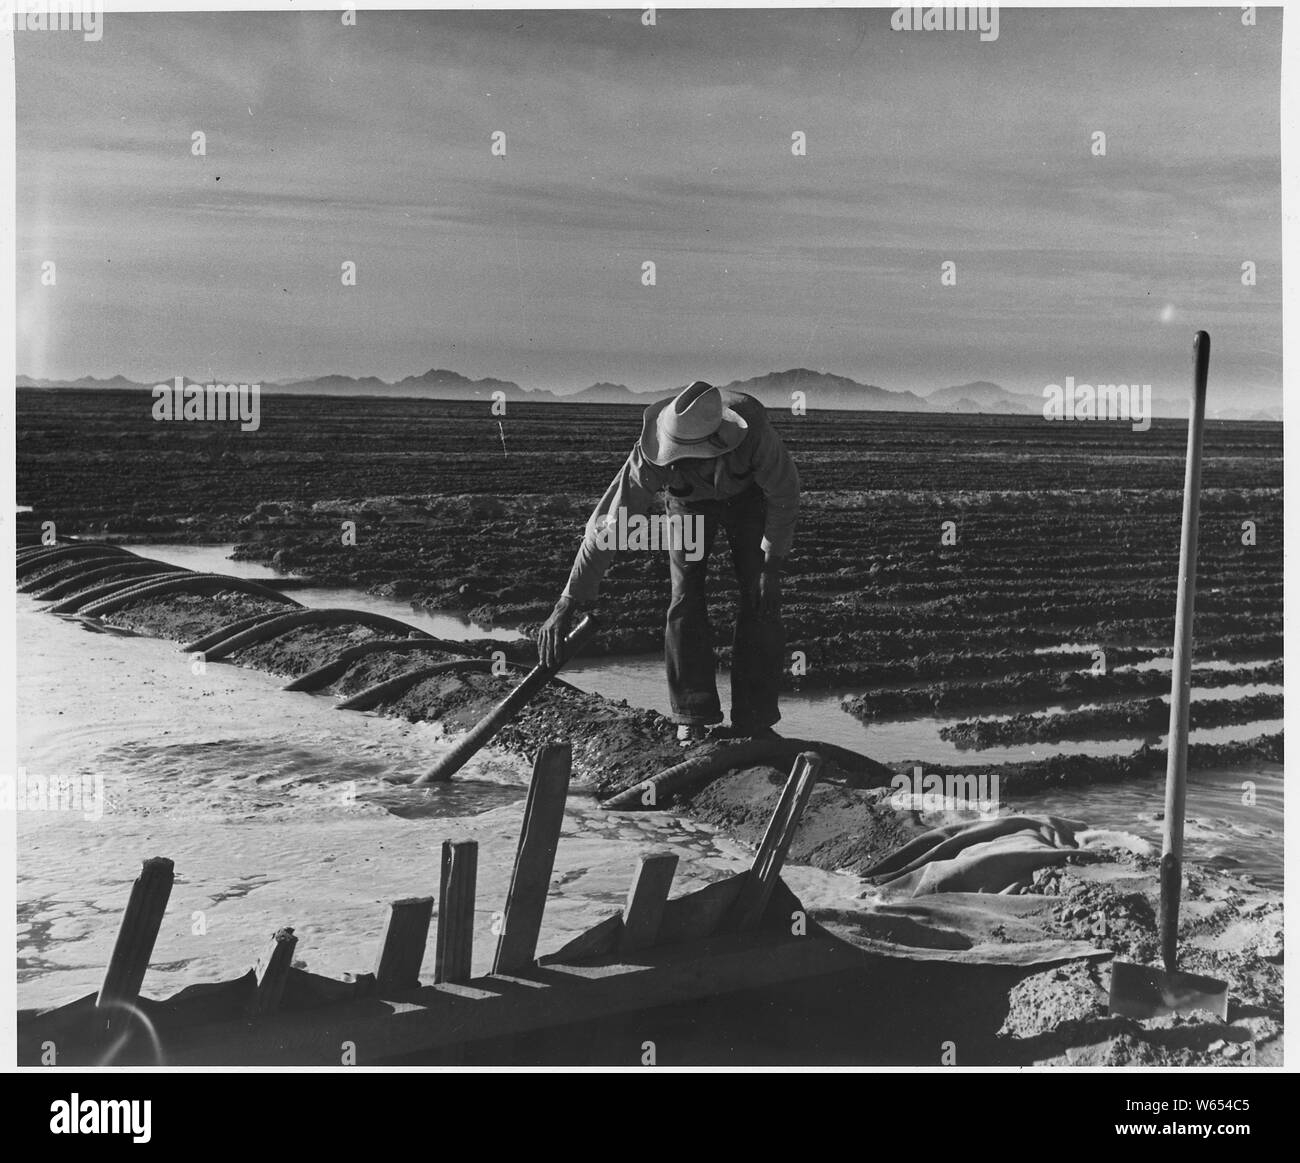 Eloy District, Pinal County, Arizona. Mexican irrigator siphoning from irrigation ditch to field.; Scope and content:  Full caption reads as follows: Eloy District, Pinal County, Arizona. Mexican irrigator siphoning from irrigation ditch to field. Stock Photo